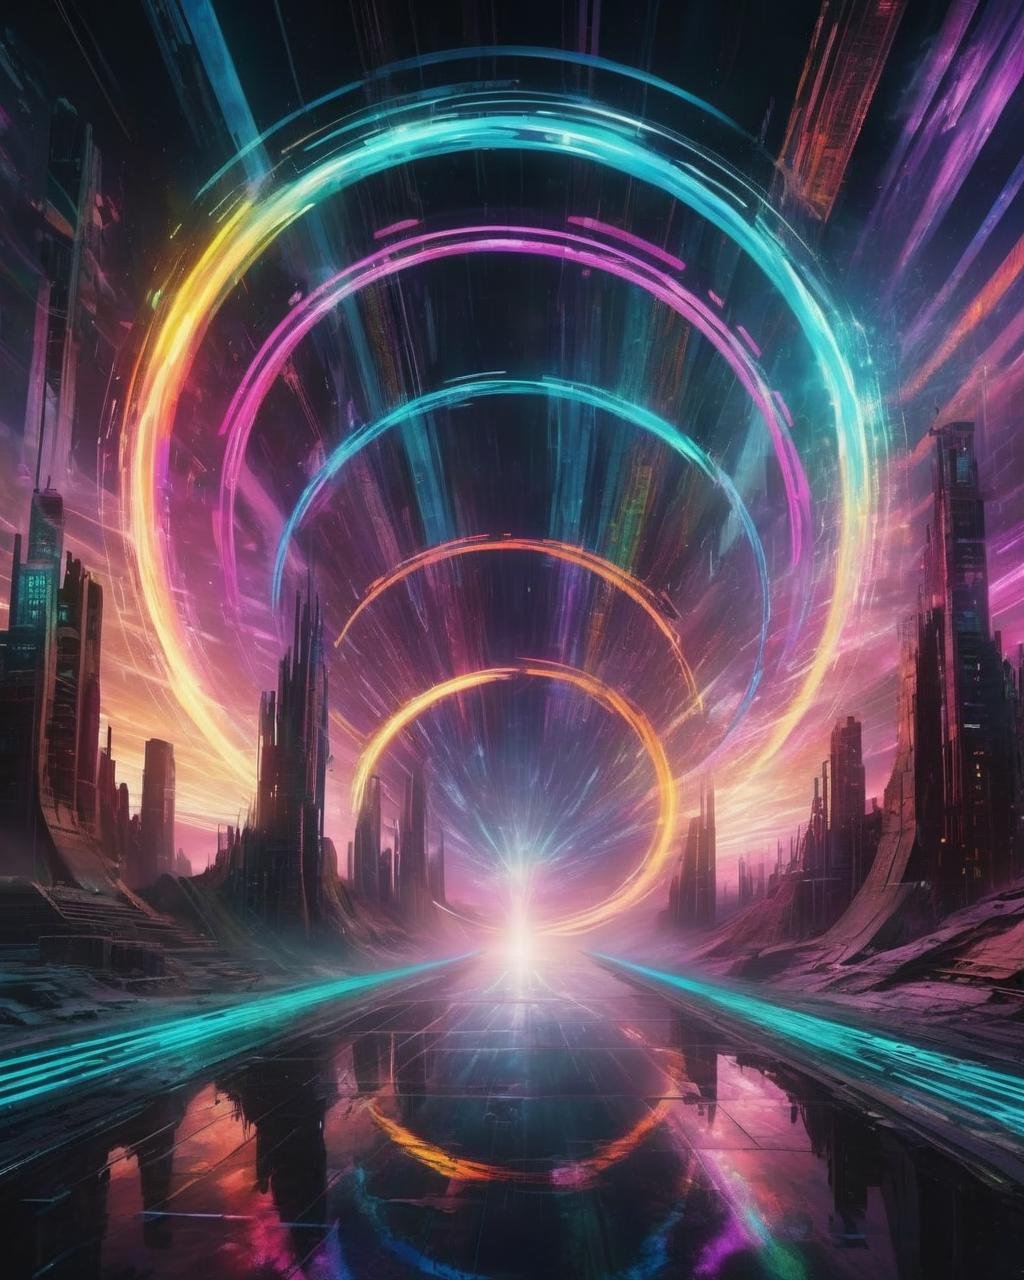 Vortex portal, swirling rifts in reality connecting different dimensions, casting multicolored beams across the dystopian landscape. , cyberpunk style